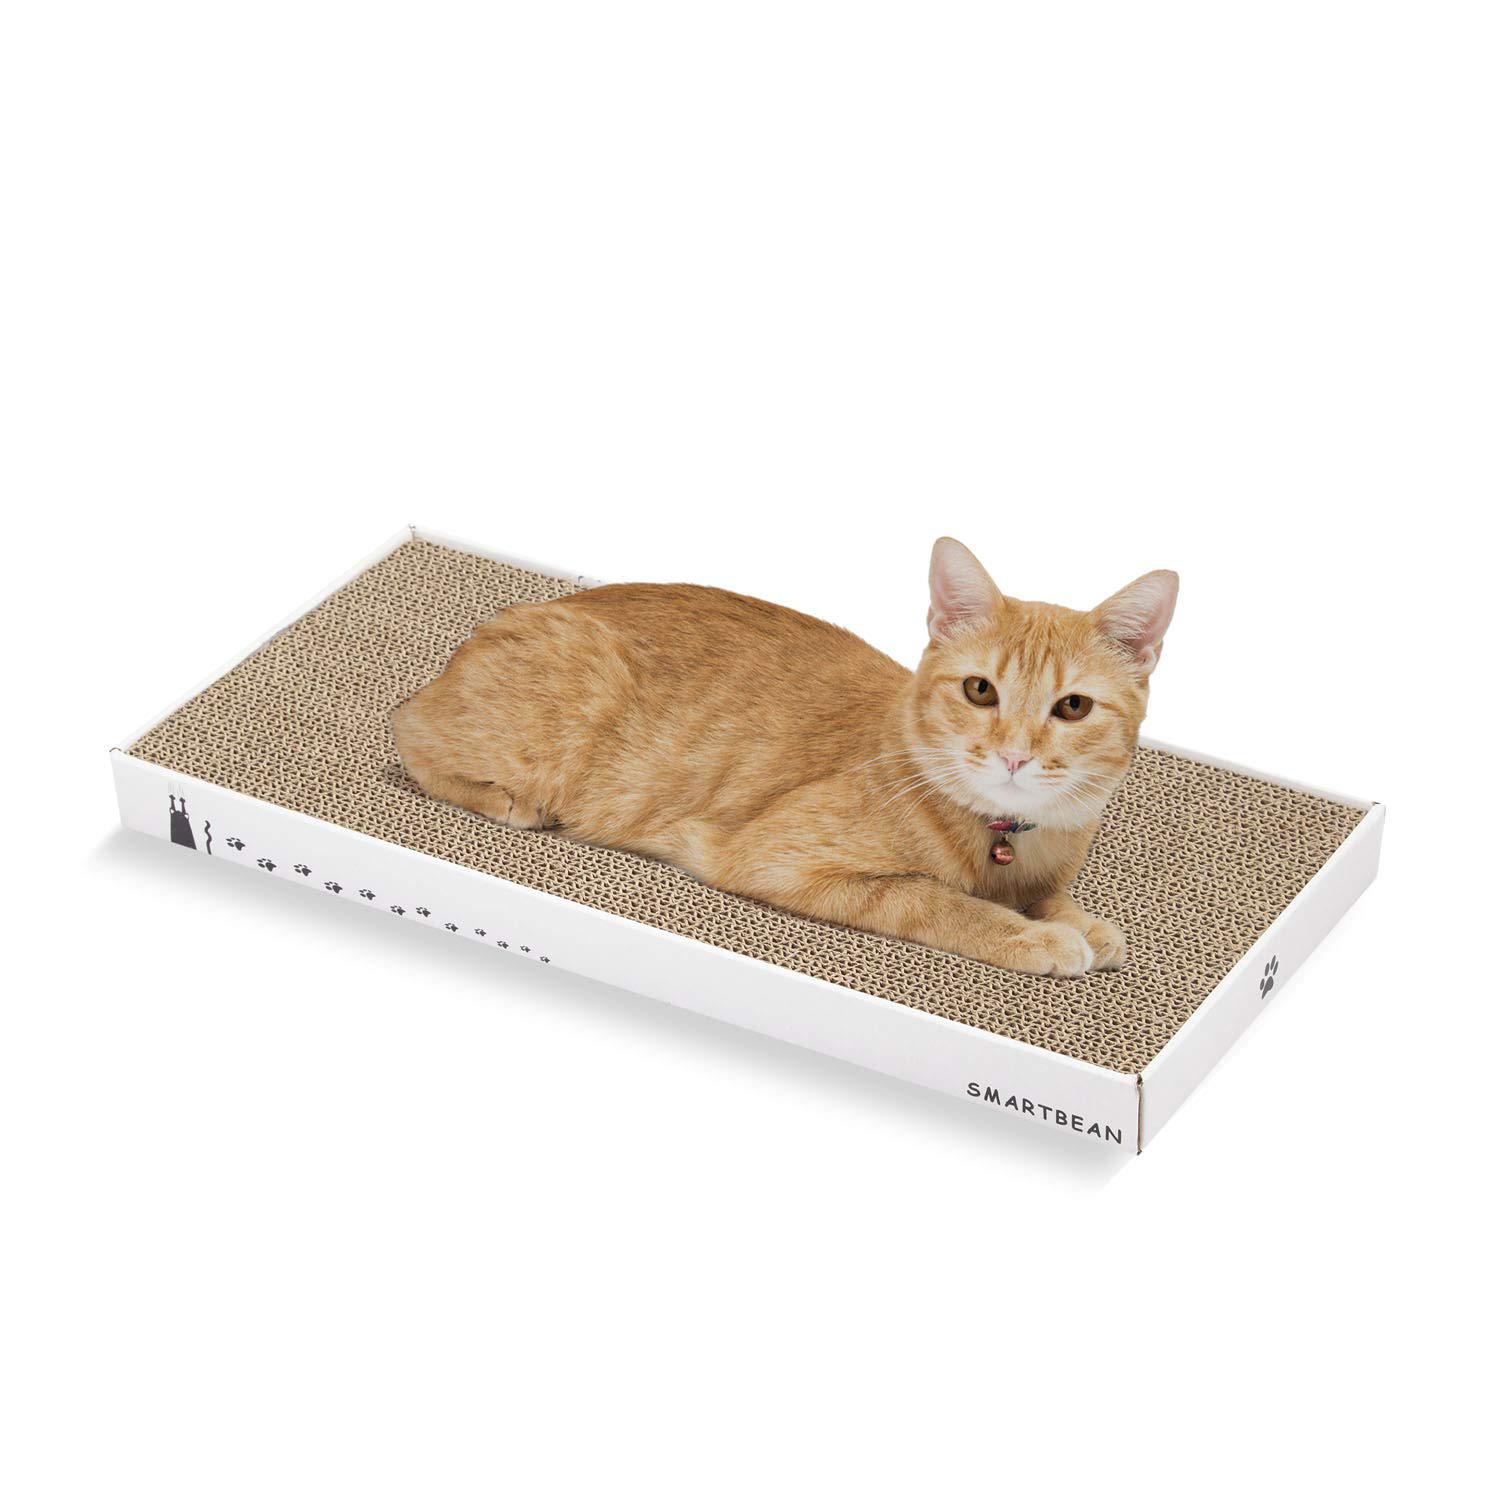 Smartbean Cardboard Scratcher Pad Scratching post:Smartbean Cat Scratch Pad,Cat Scratching Post with Durable&High Density Cardboard, Indoo